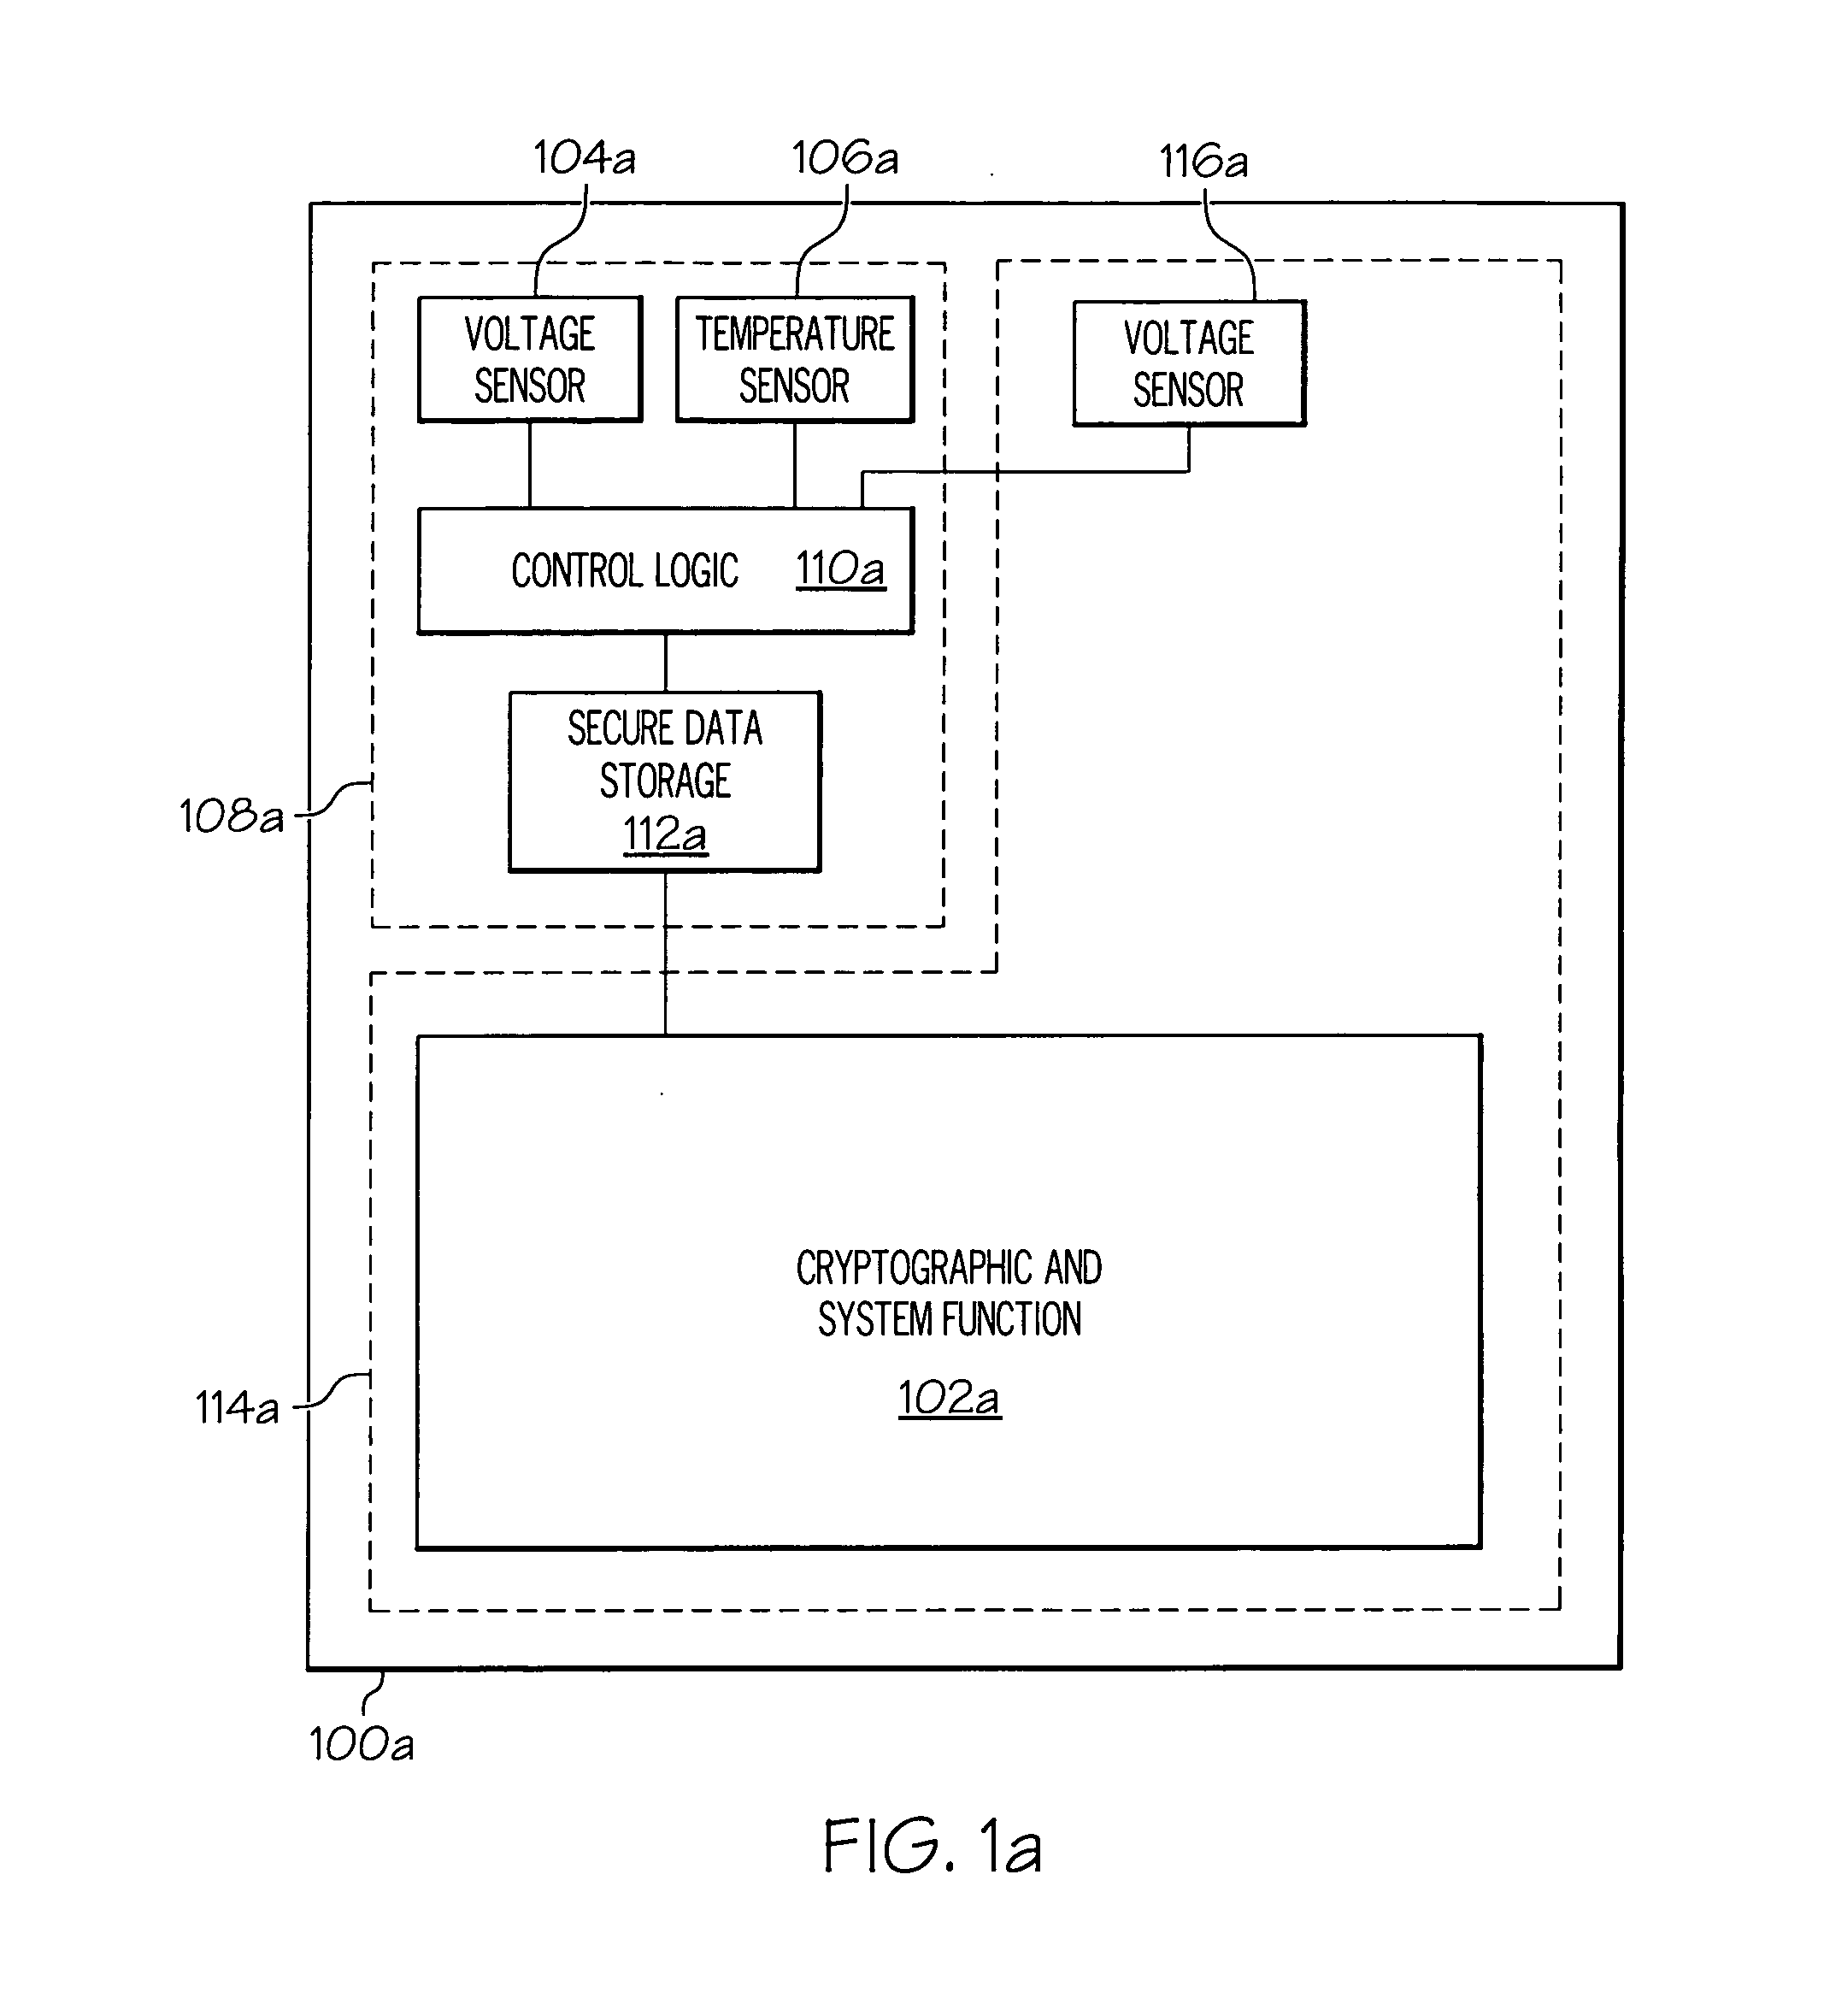 Cryptographic circuit with voltage-based tamper detection and response circuitry